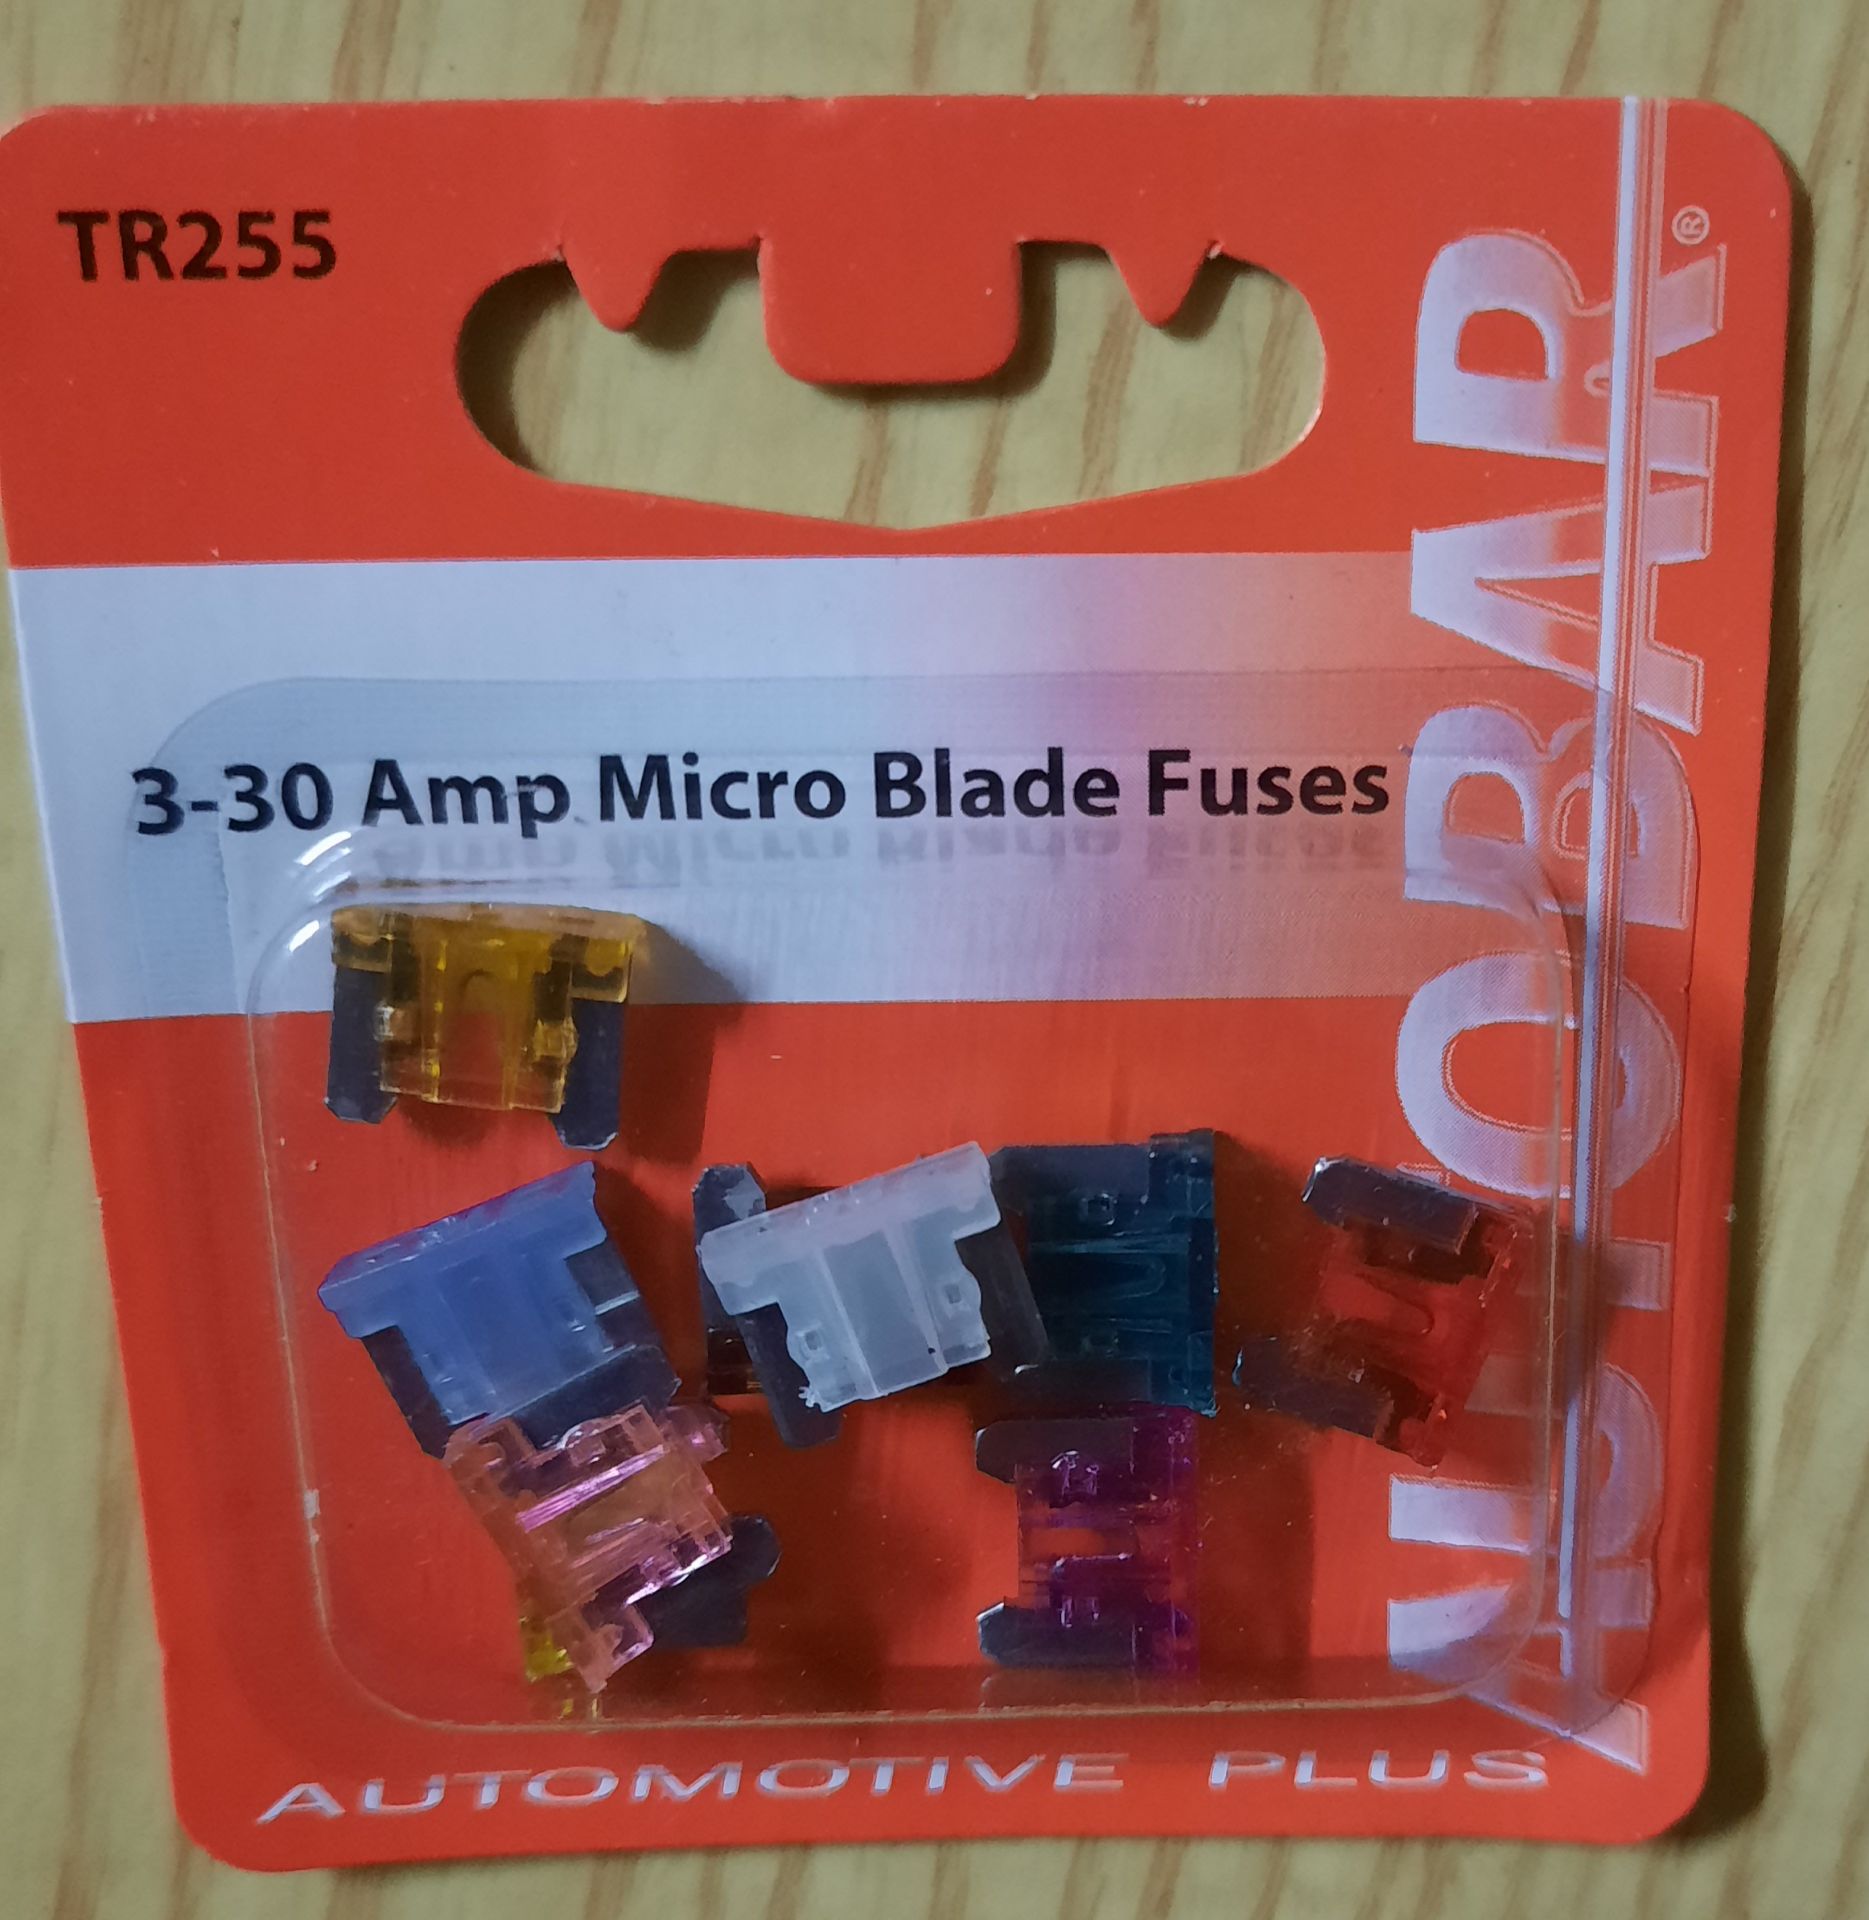 X 45 BRAND NEW PACKAGES OF 3-30 AMP MICRO BLADE FUSES